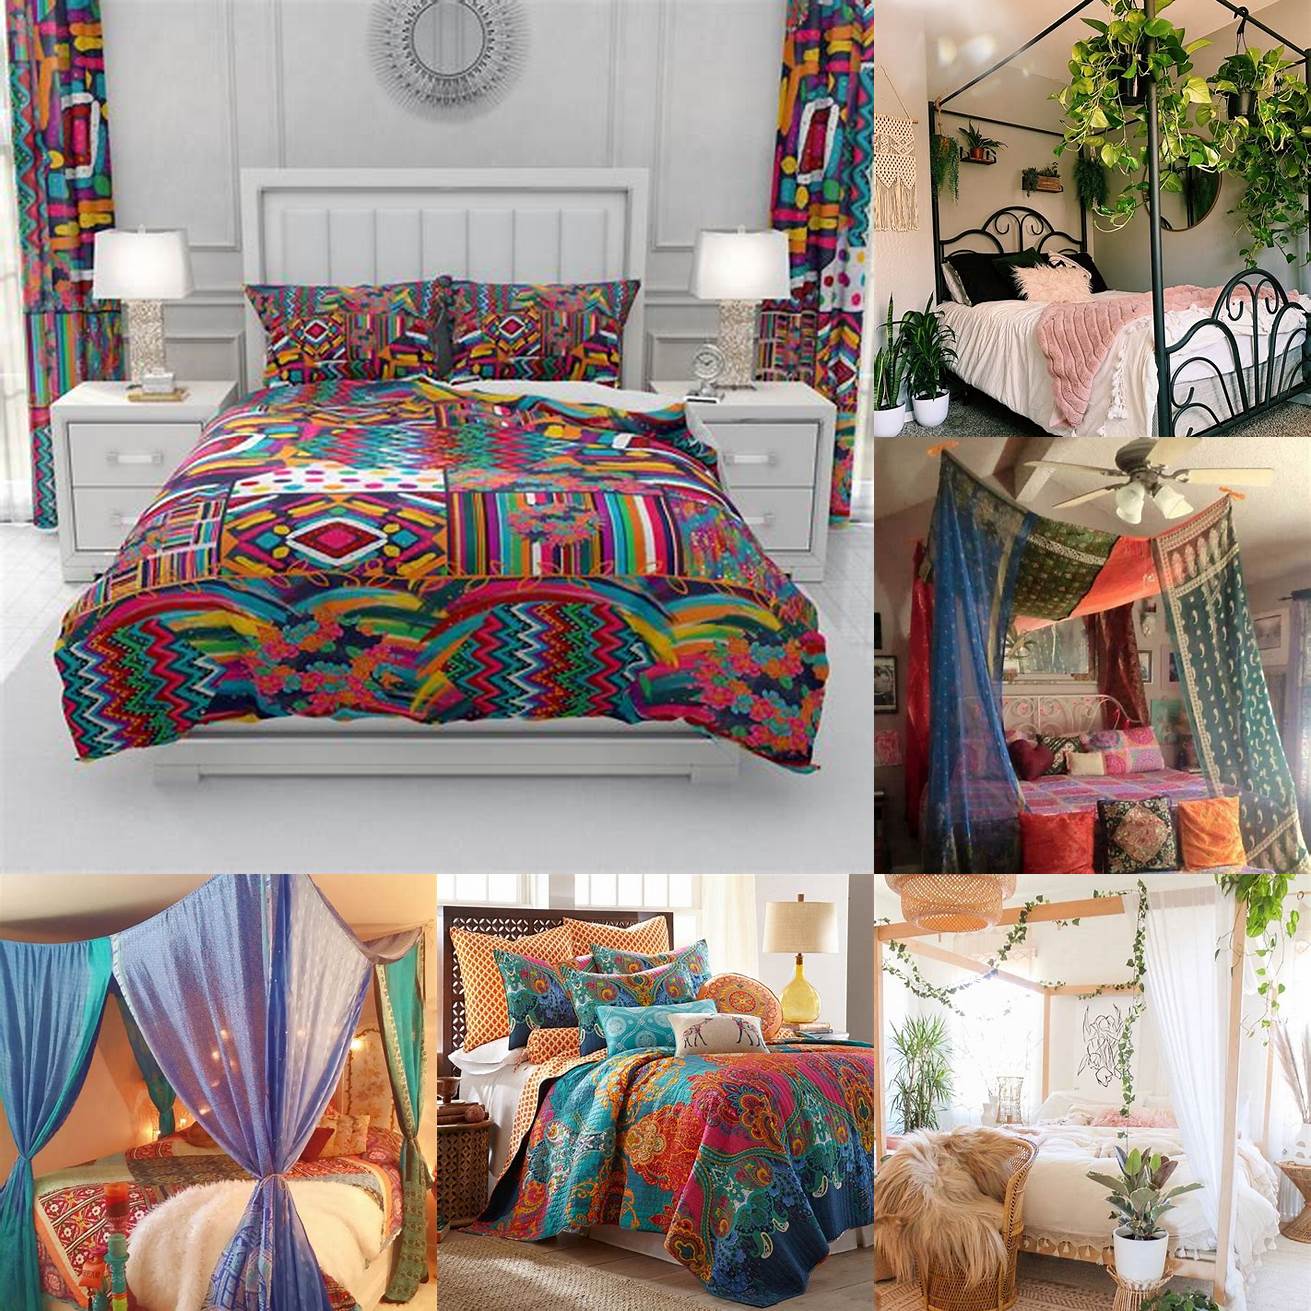 Bohemian metal canopy bed with colorful bedding